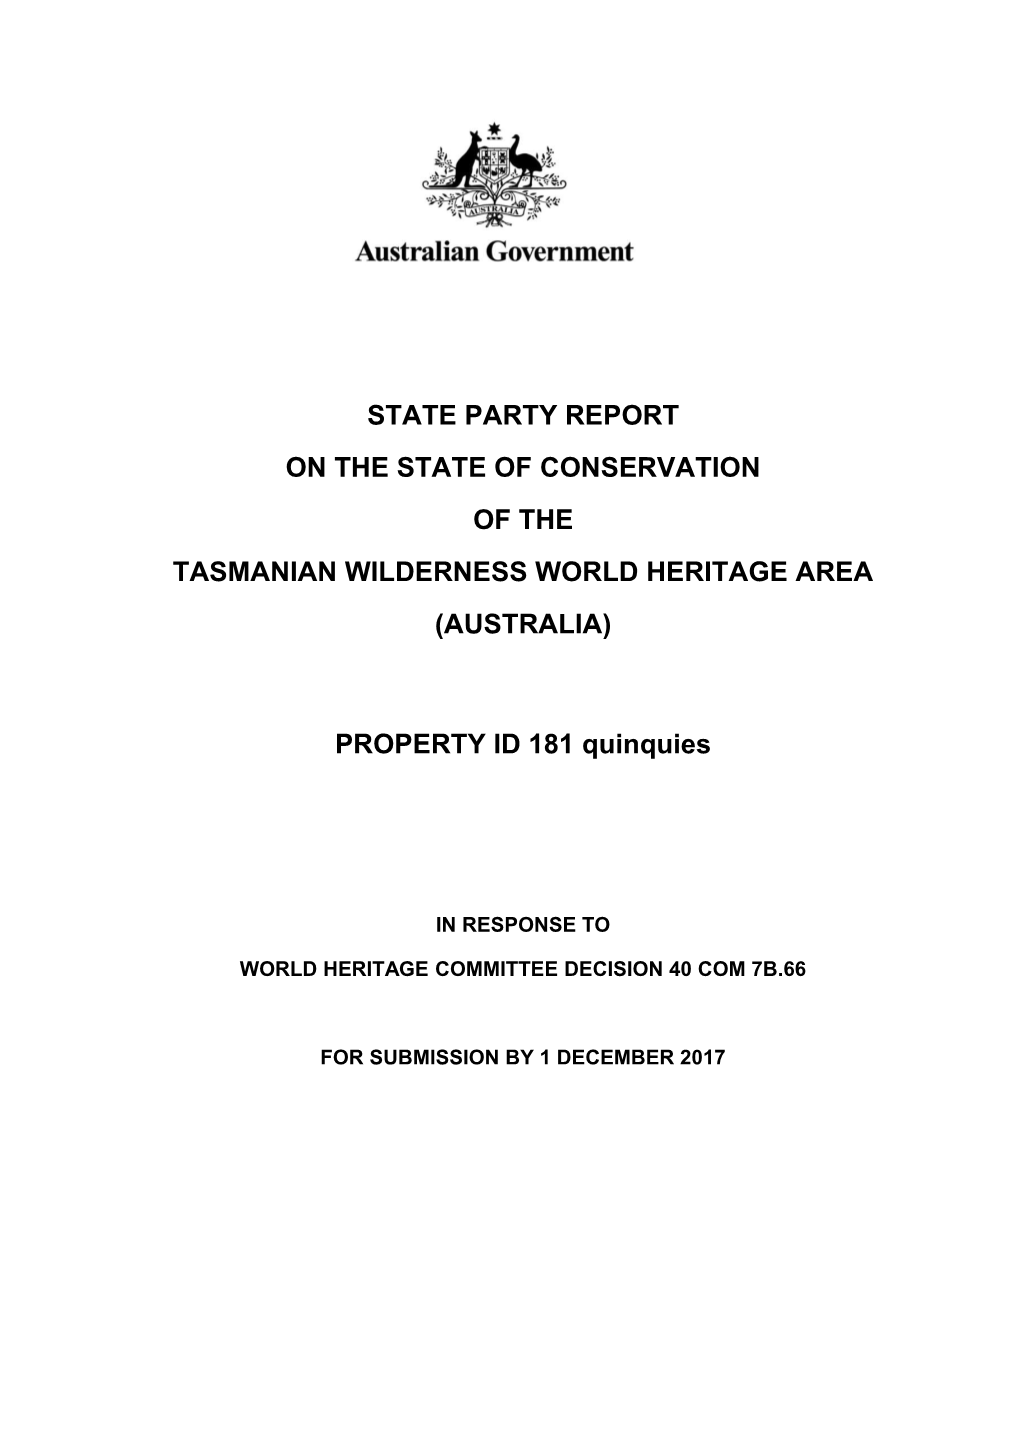 State Party Report on the State of Conservation of the Tasmanian Wilderness World Heritage